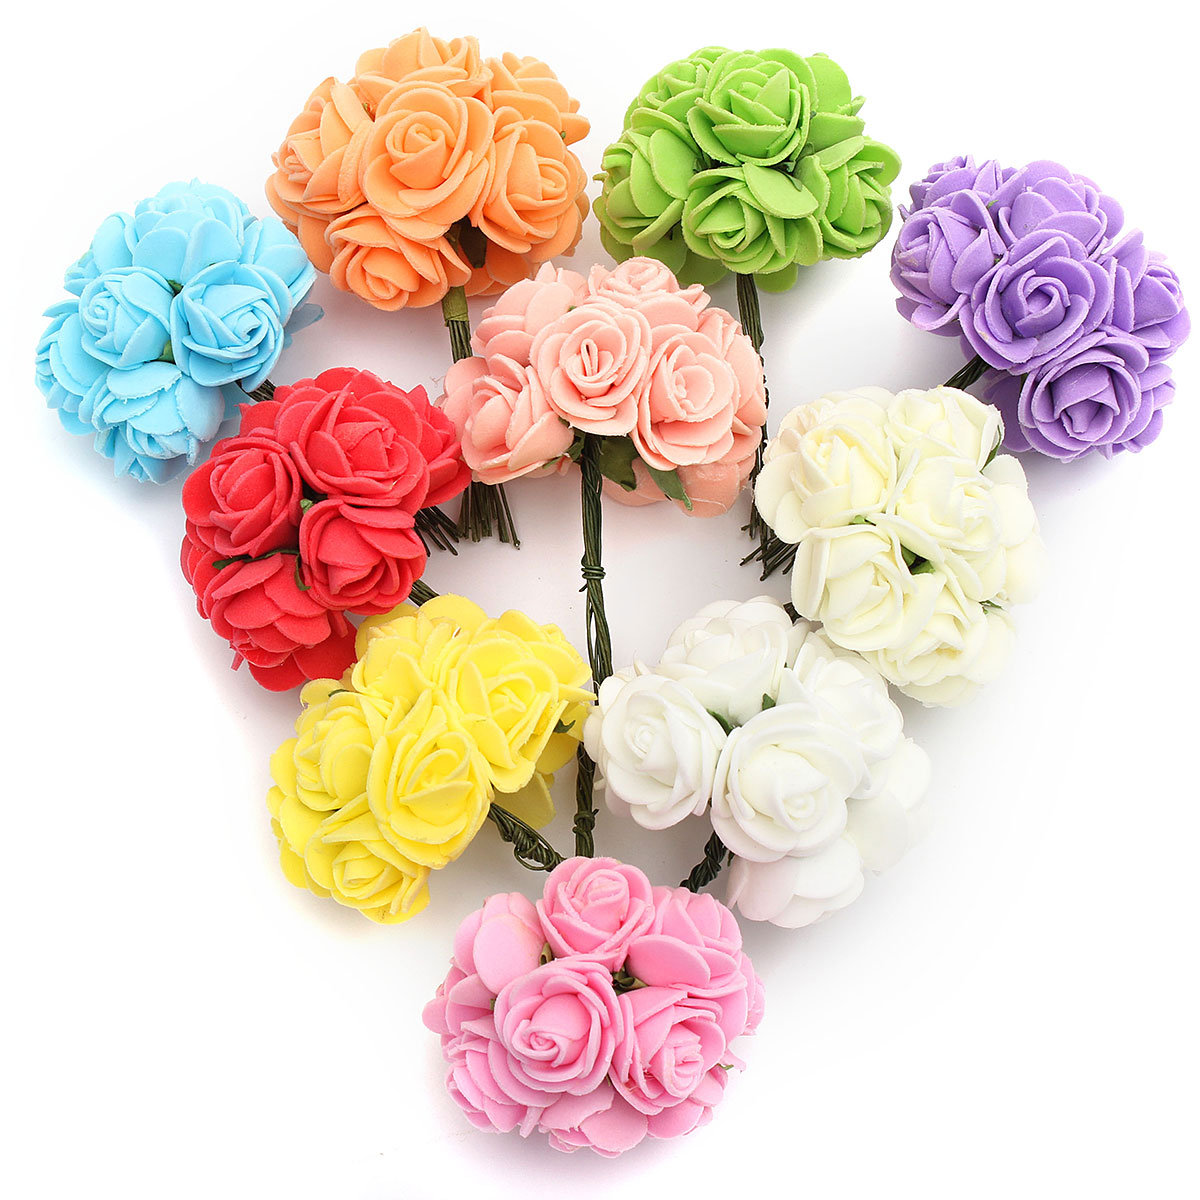 

12PCS Bride Bouquet Paper Rose Flowers With Wire Stems Wedding Home Party Decoration, White white purple light pink orange yellow green blue red pink